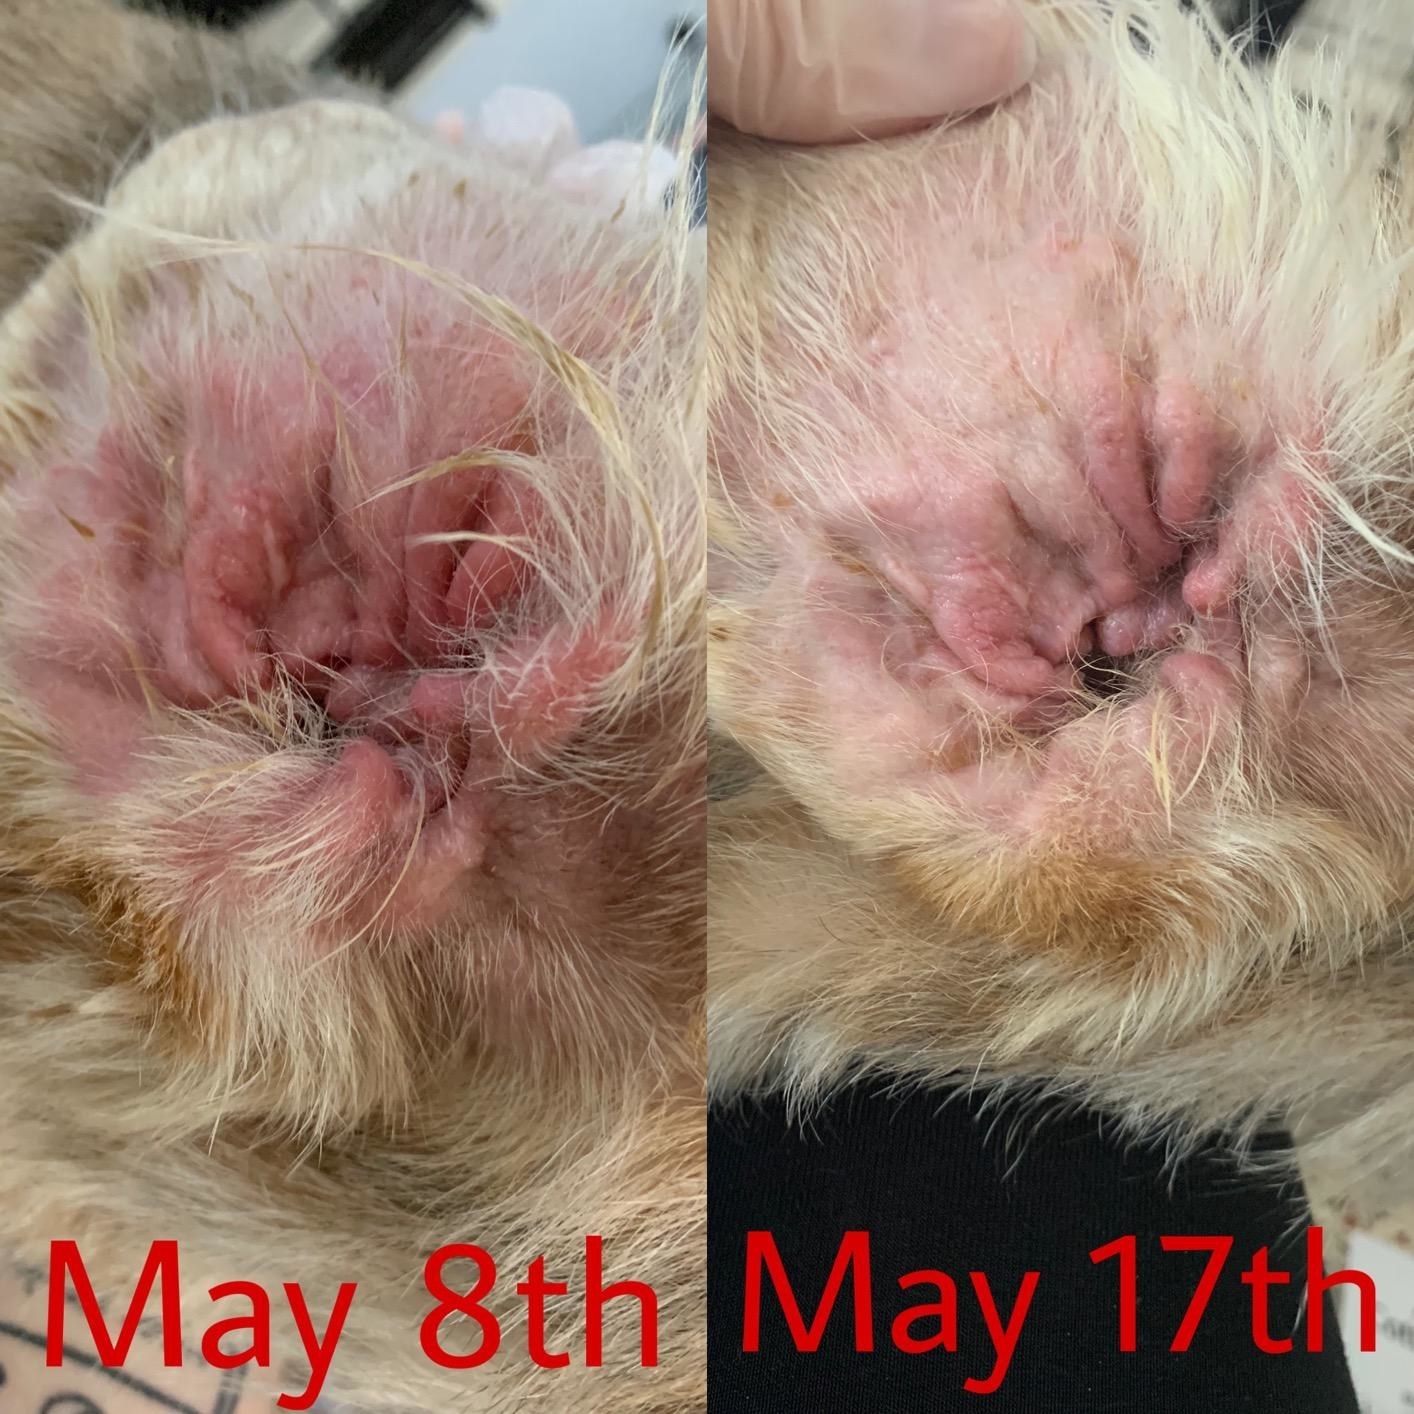 Photo of a dog&#x27;s red and inflamed ear taken on May 8 next to a photo of the same ear on May 17 looking normal and healthy